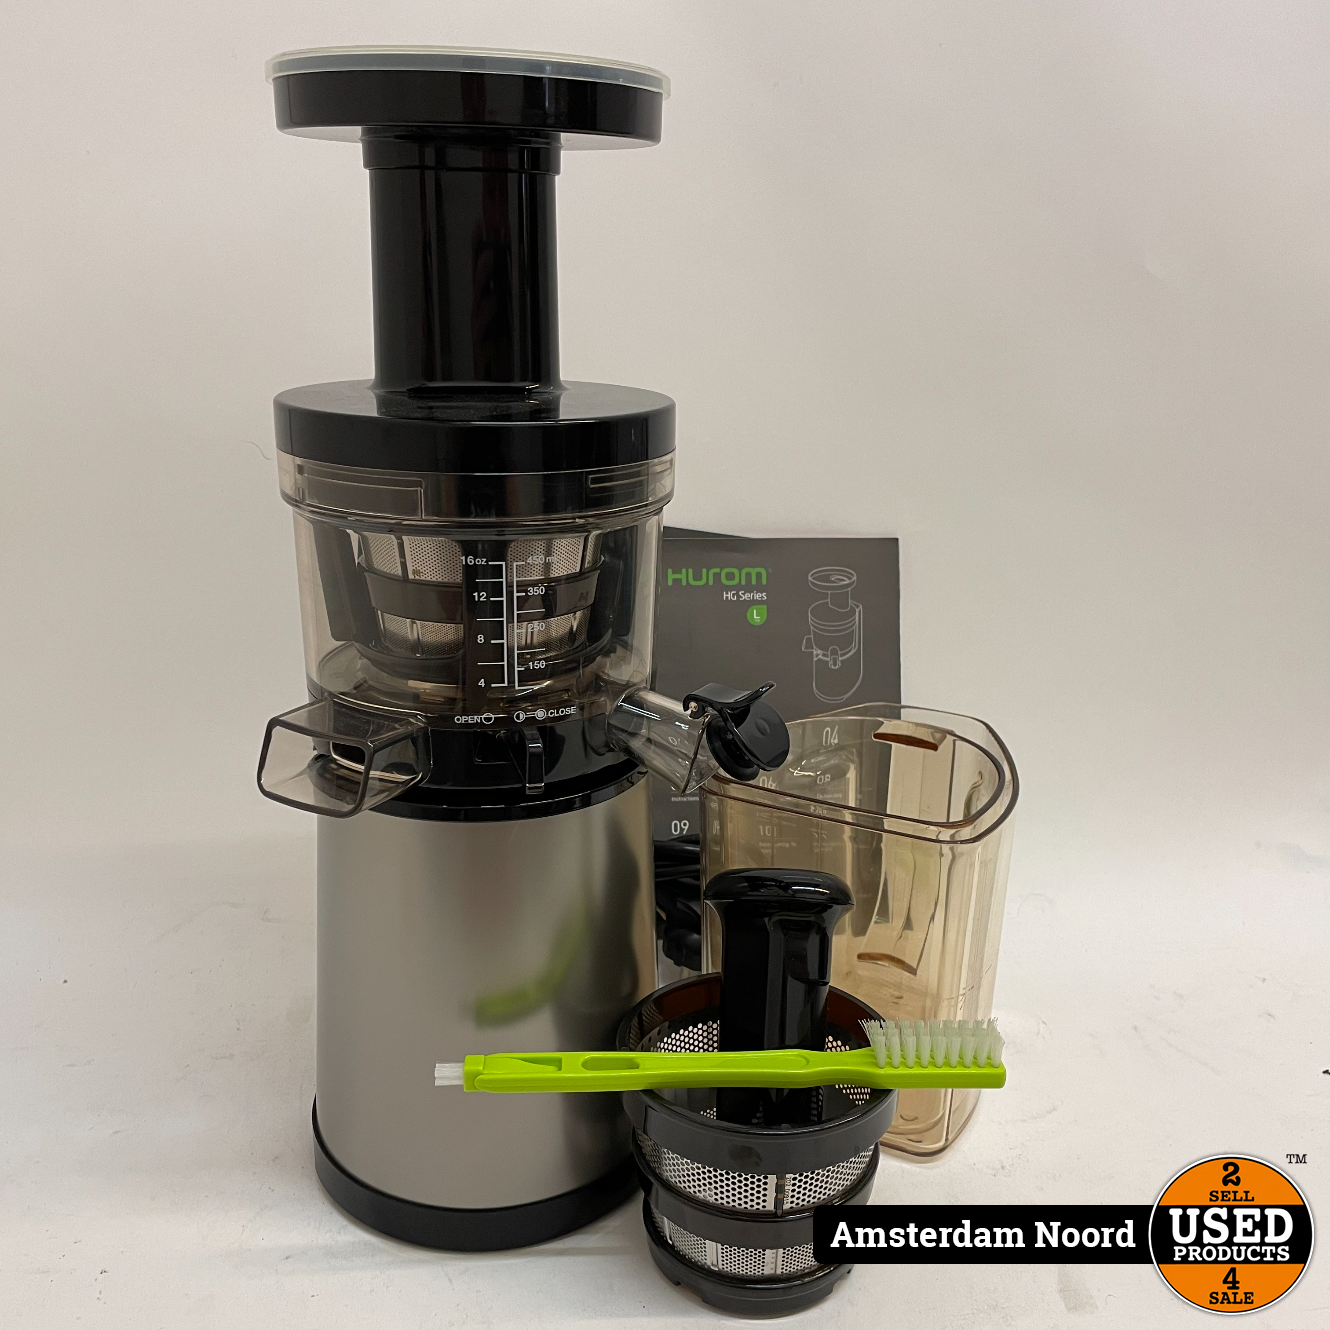 Hurom HG-SBE11 Juicer Used Products Amsterdam